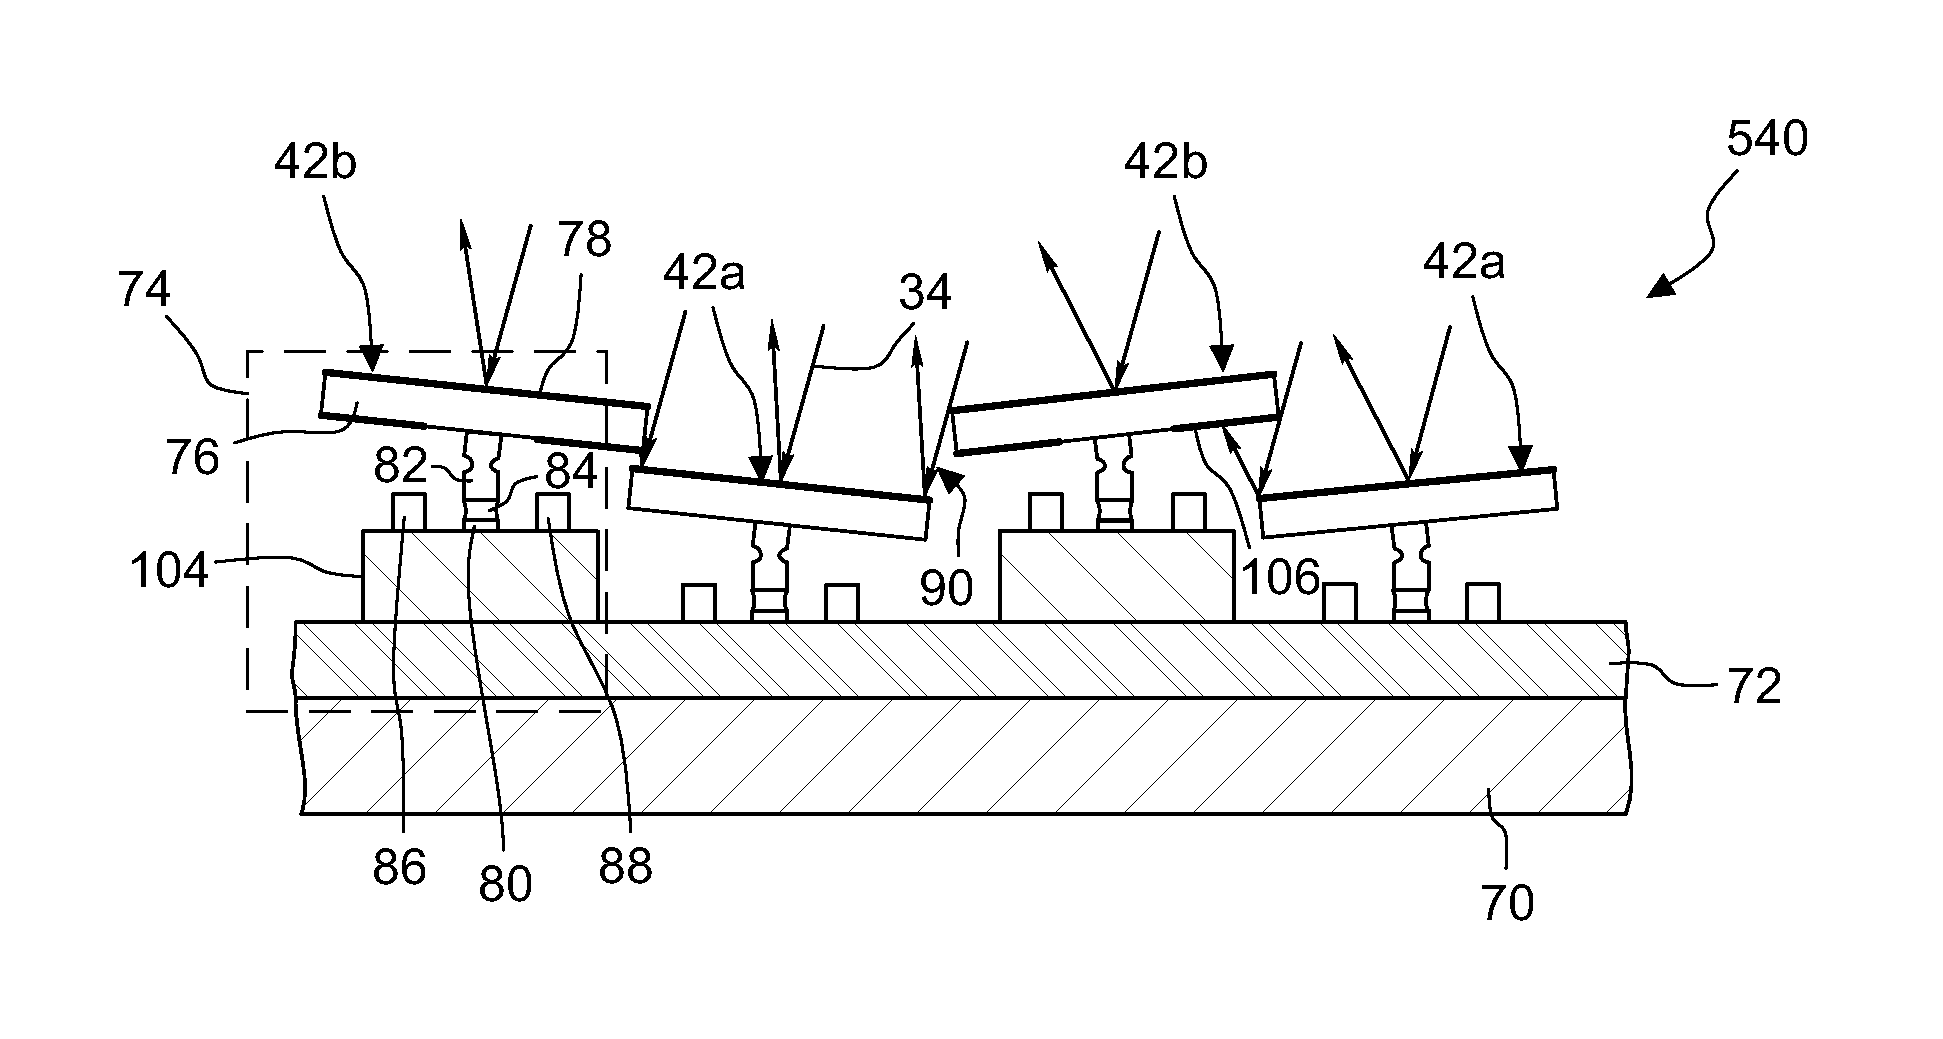 Light modulator and illumination system of a microlithographic projection exposure apparatus